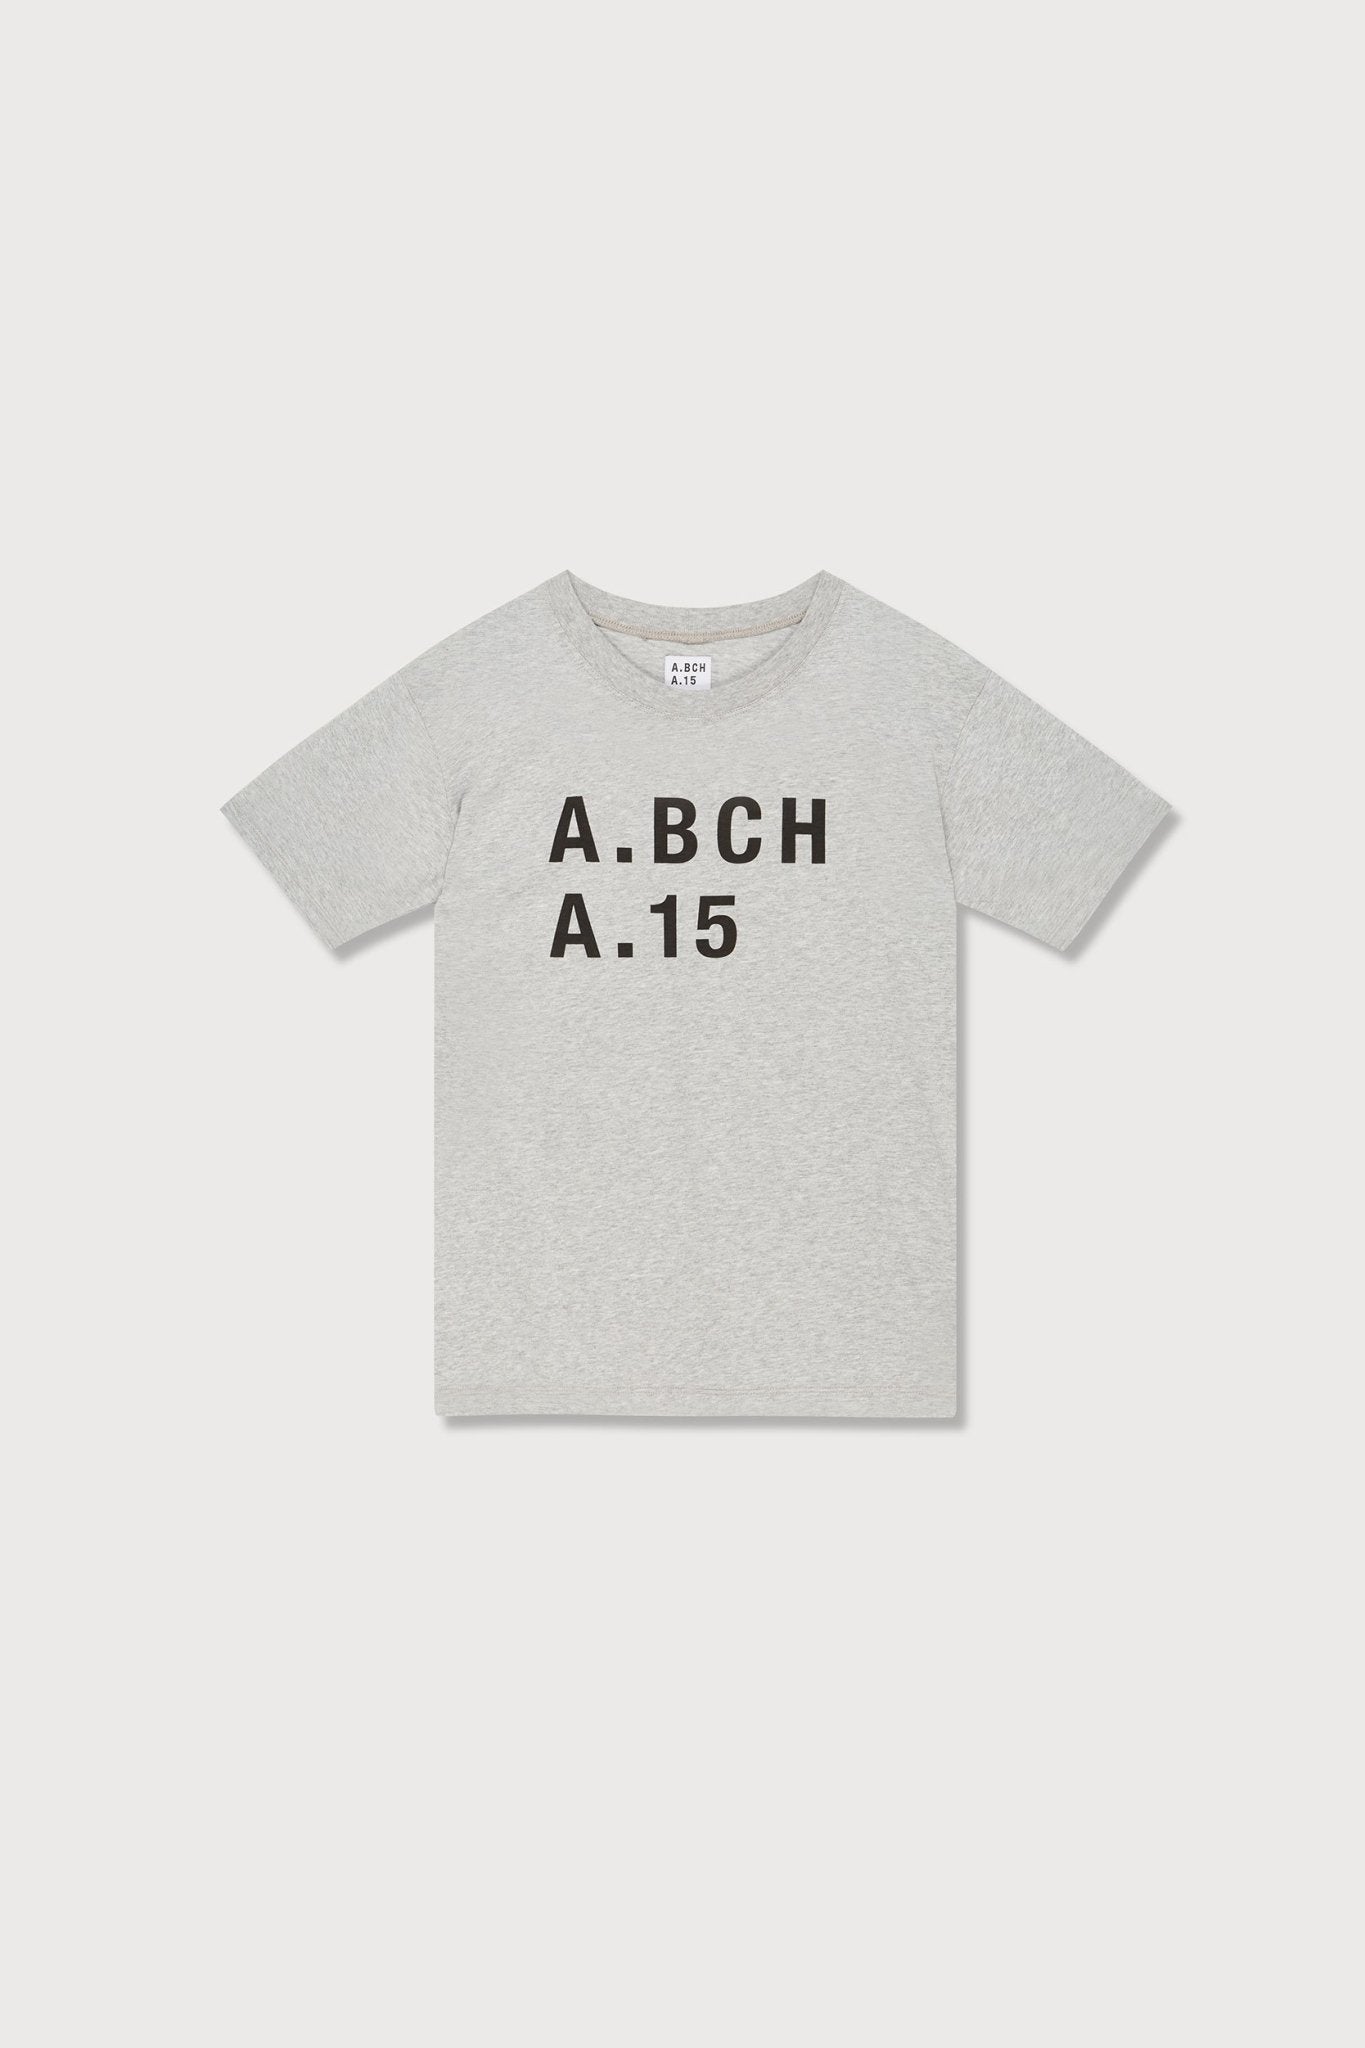 A.BCHA.15T-shirtA15-FT-CL-GY-XSXS